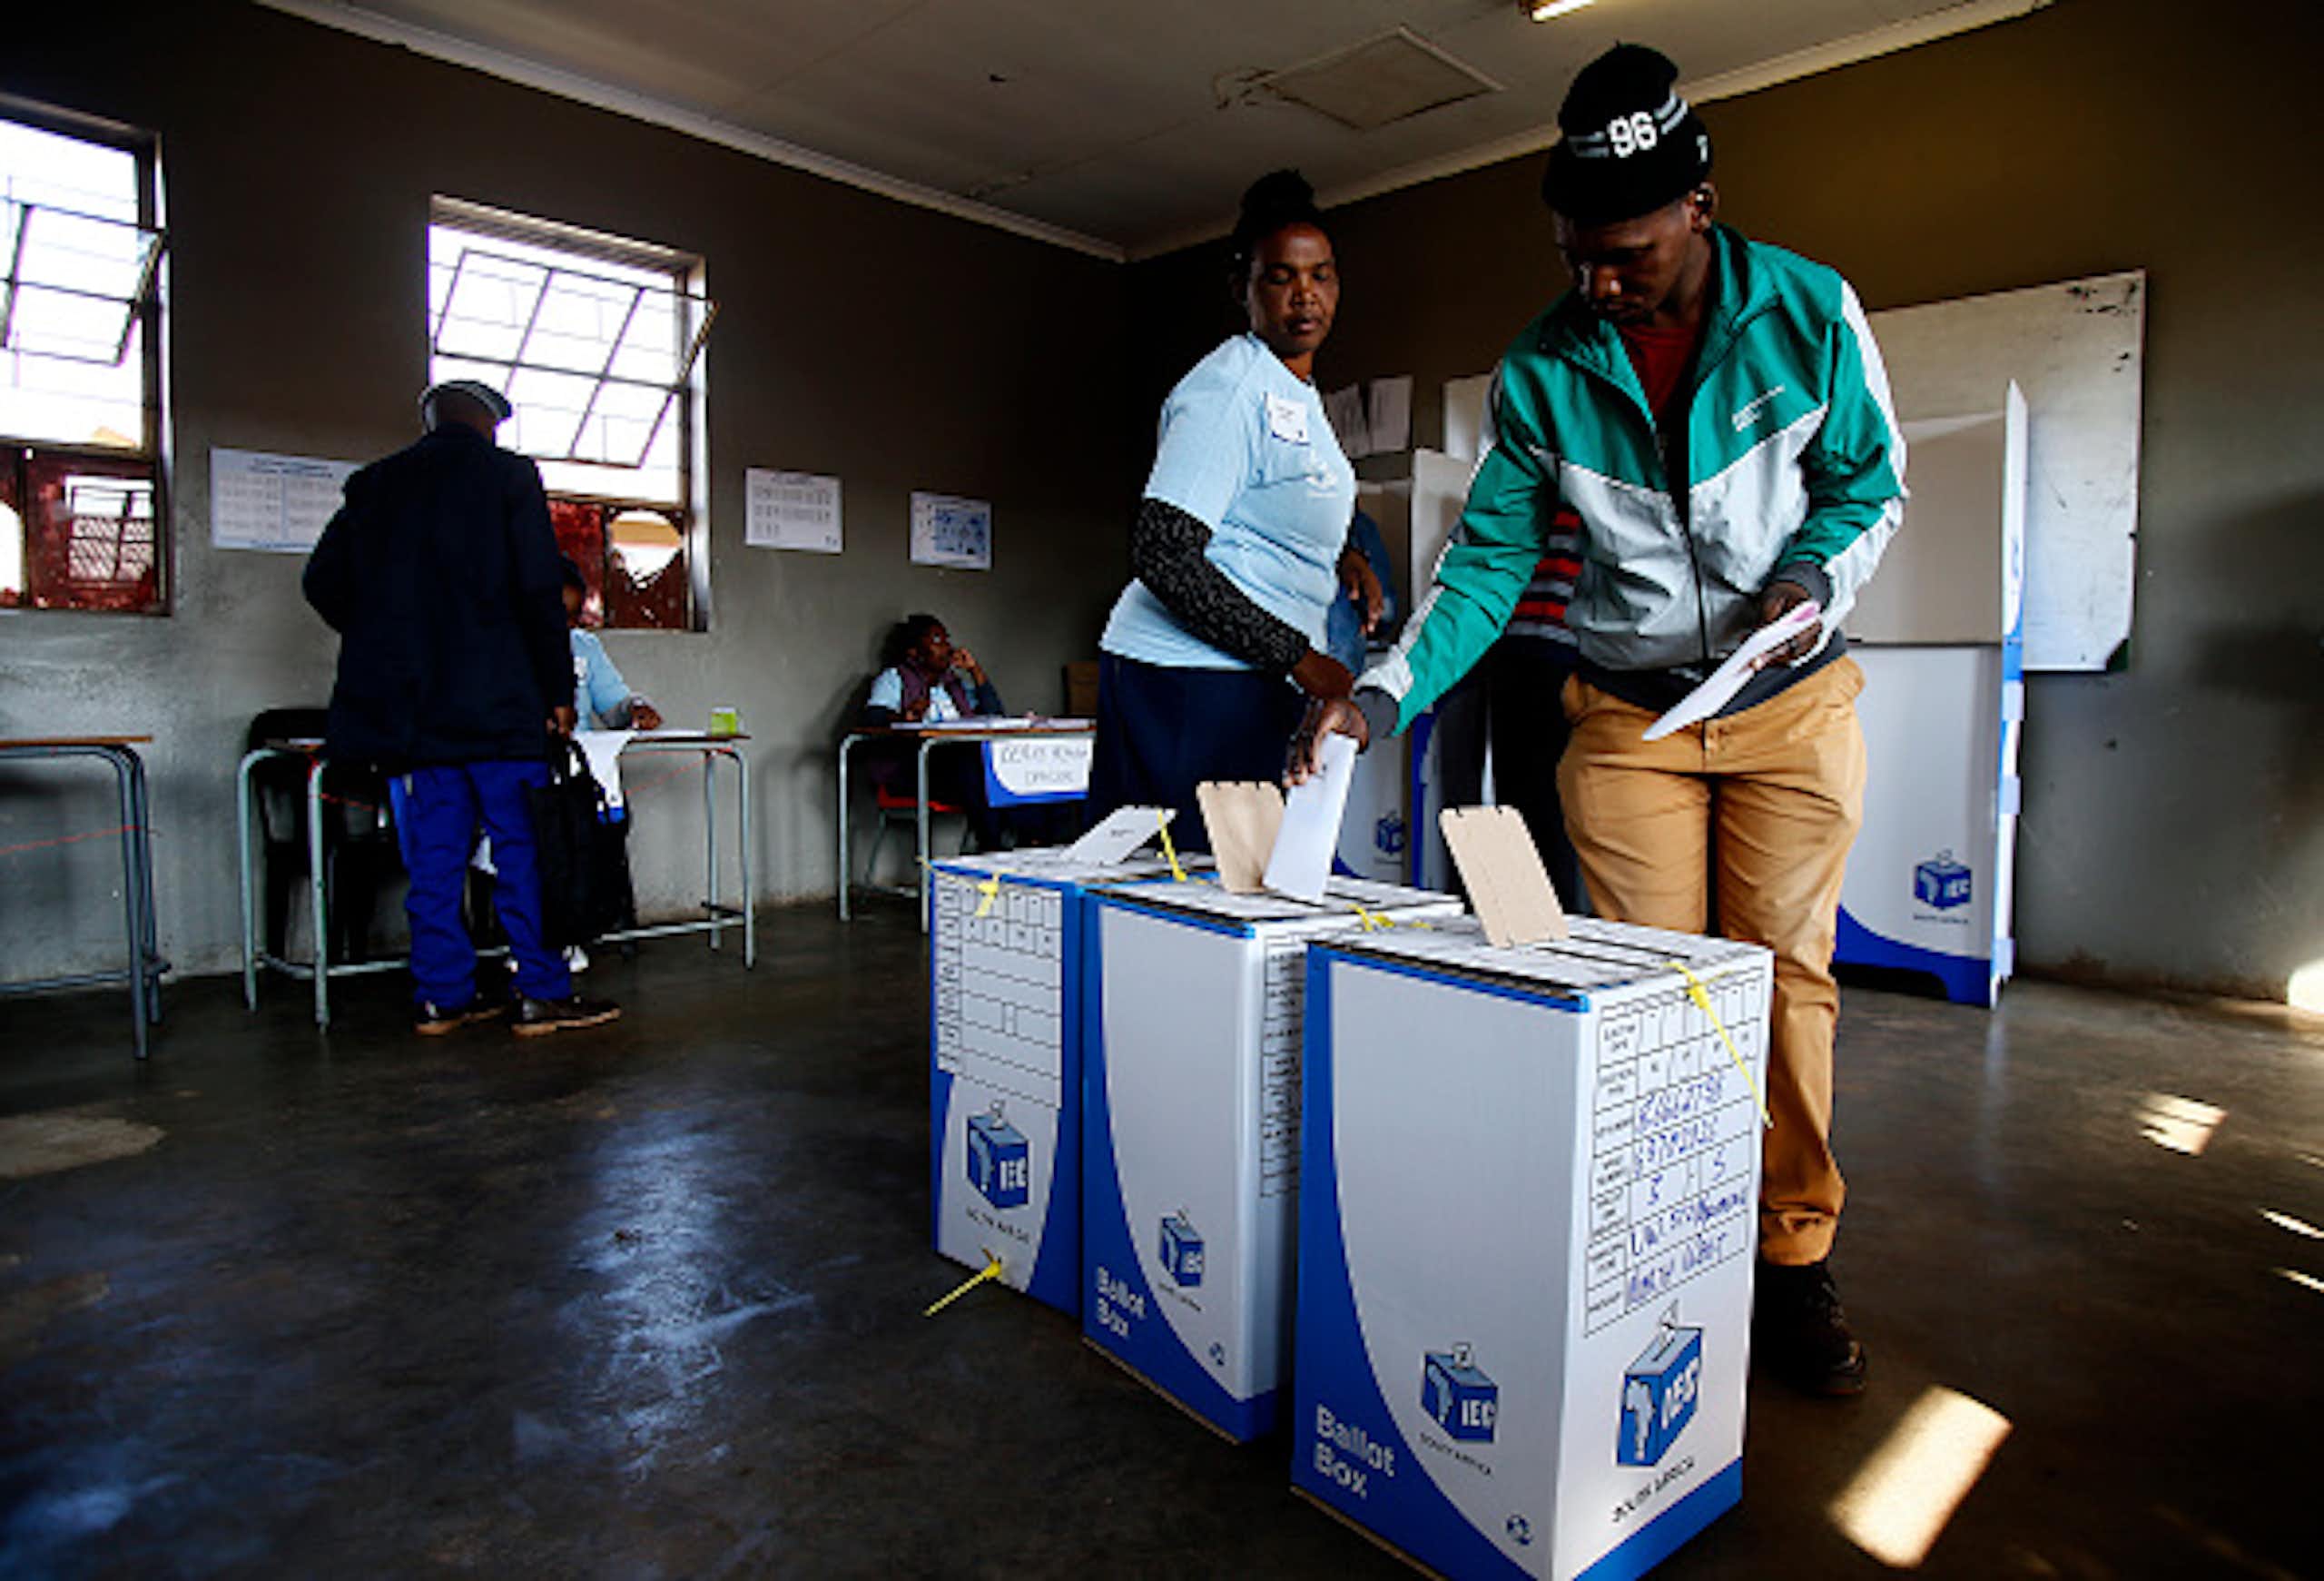 A man casts his ballot in a box marked 'IEC'.